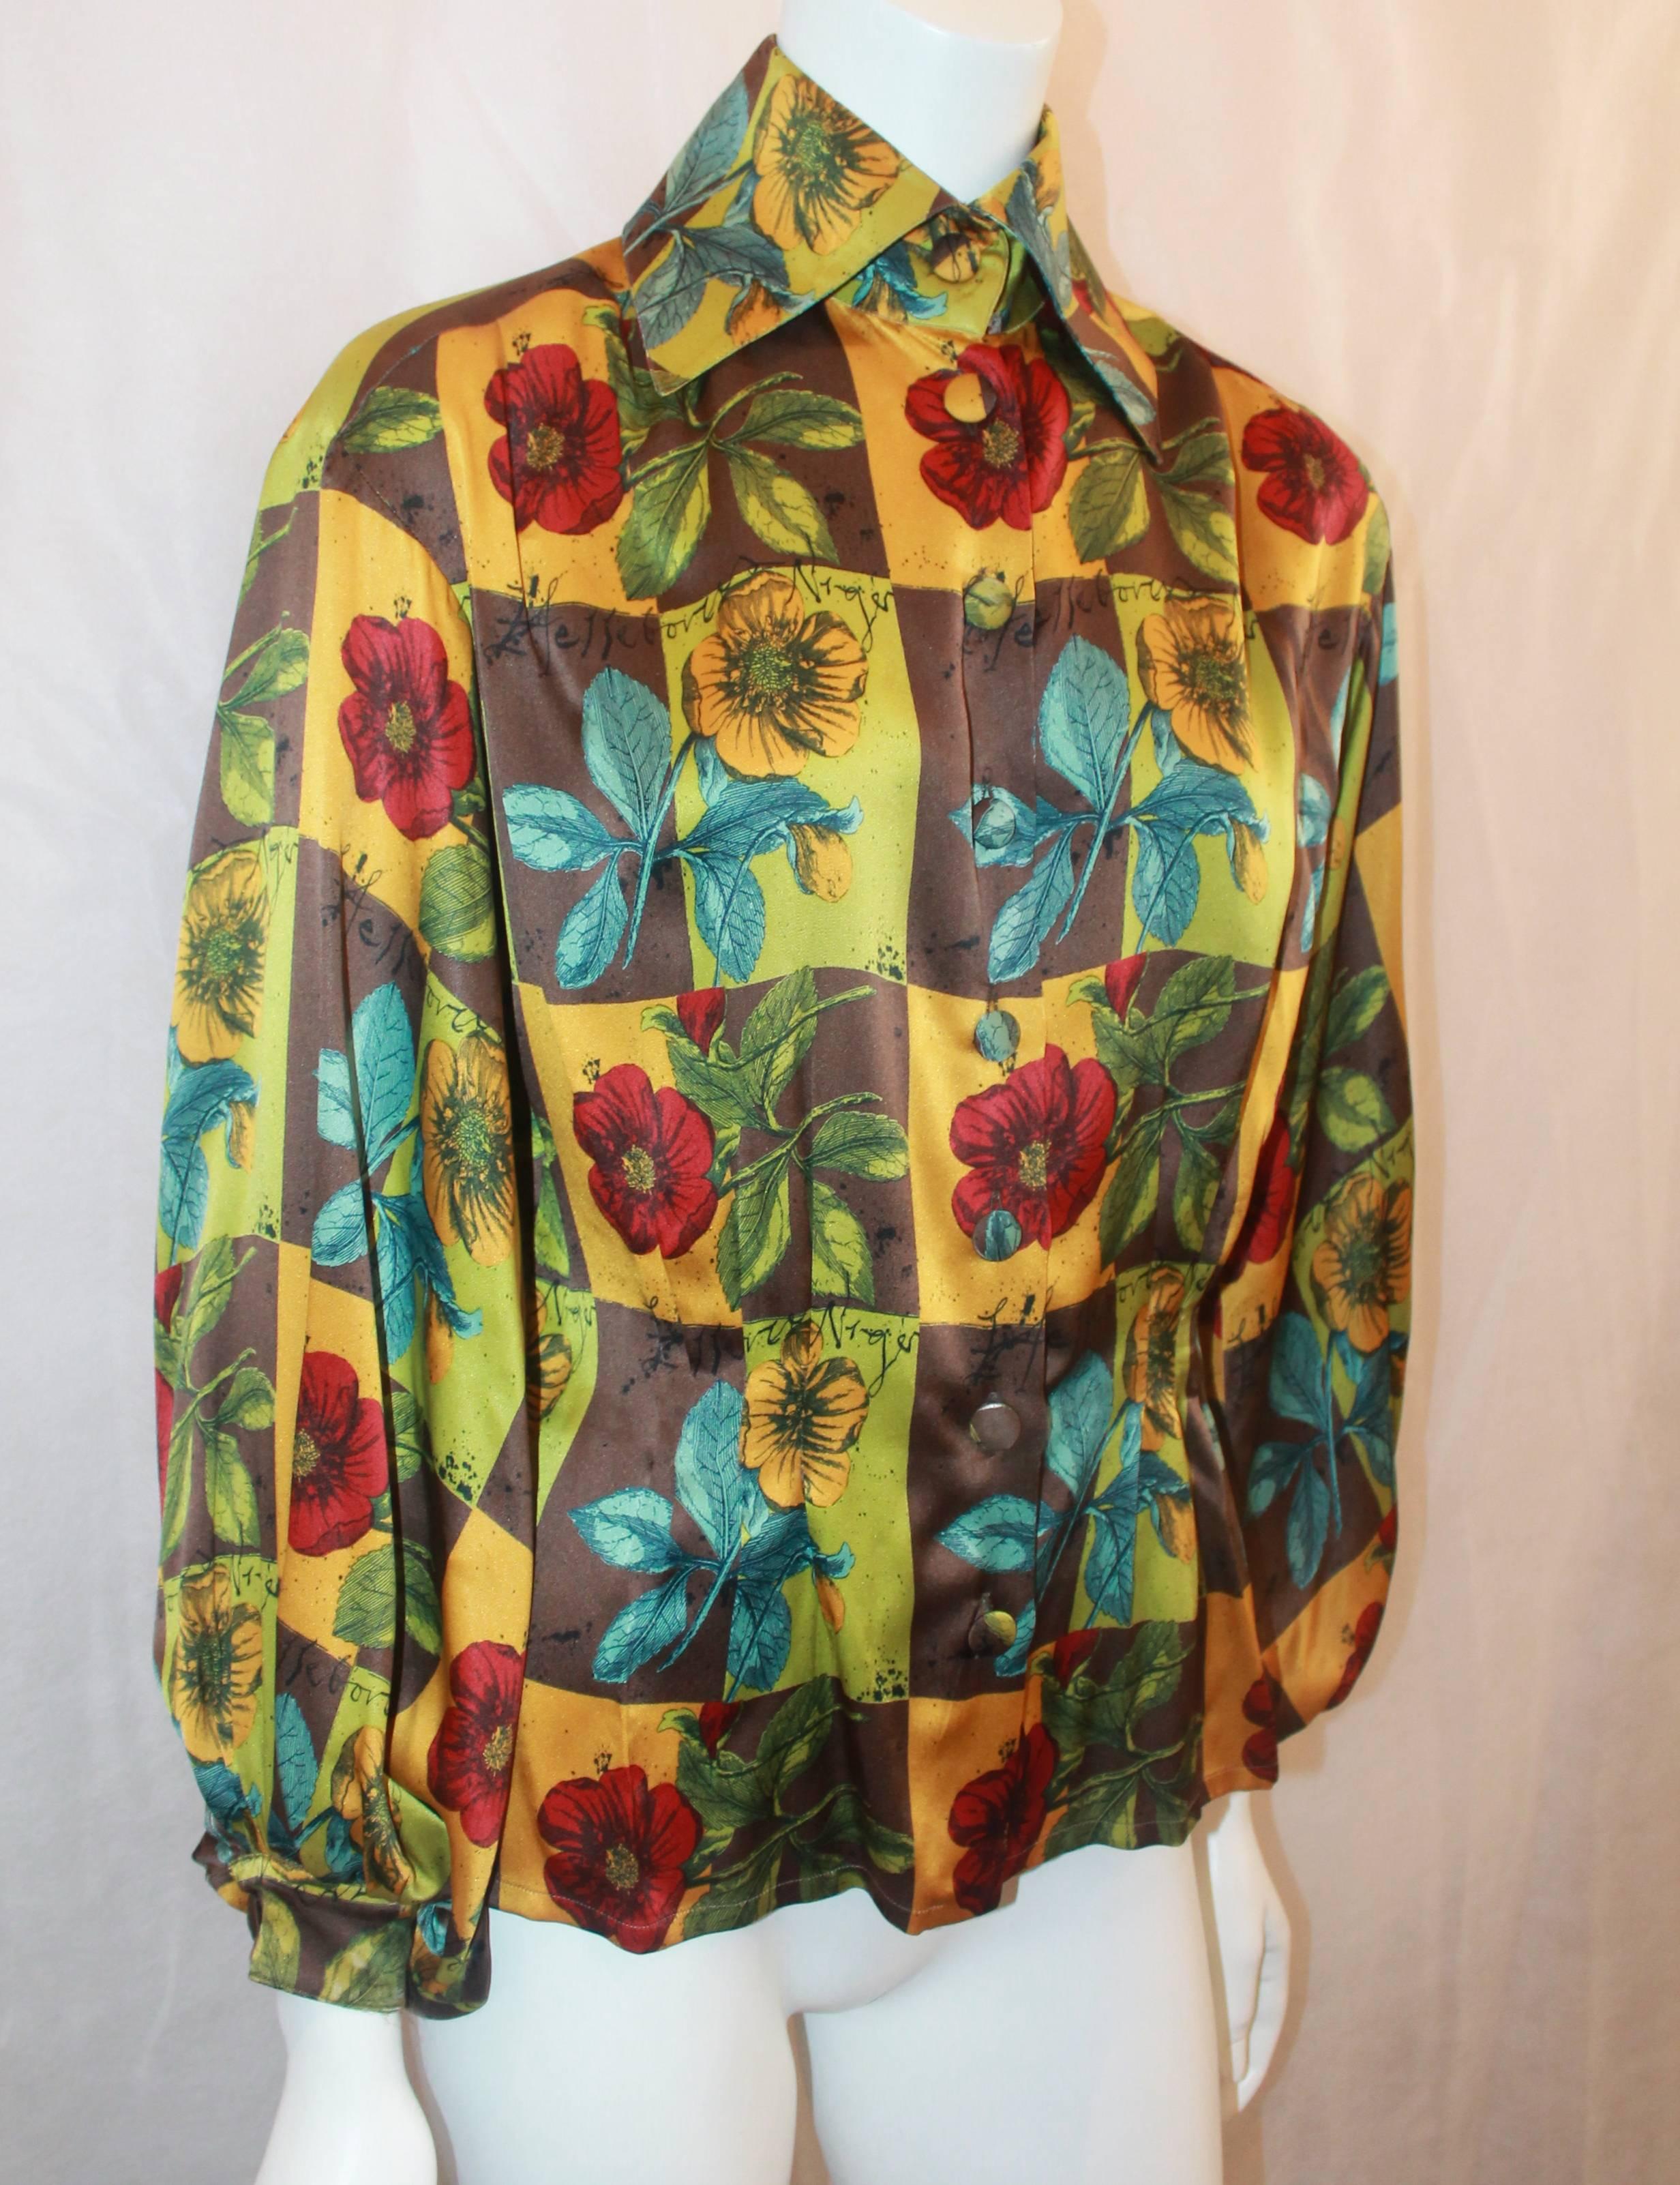 Christian Lacroix Silk Multi-color Floral Printed Blouse - 38. This blouse is in fair condition with a checkered print with flowers all over. The only issue is fraying near the end of the sleeves shown in the images. The blouse has a puffy sleeve